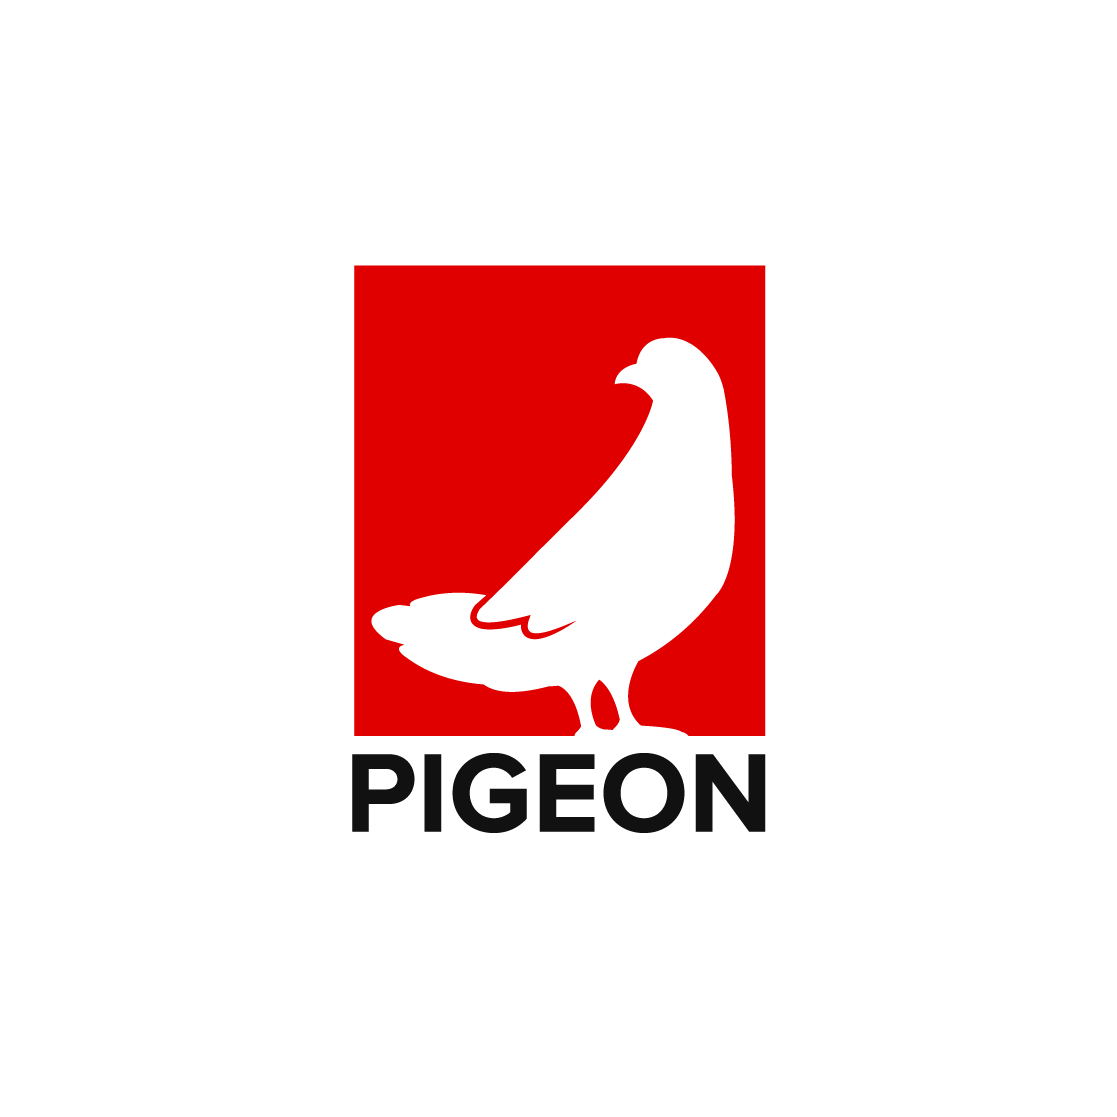 Pigeon Logo - Masculine, Professional, Entertainment Industry Logo Design for ...